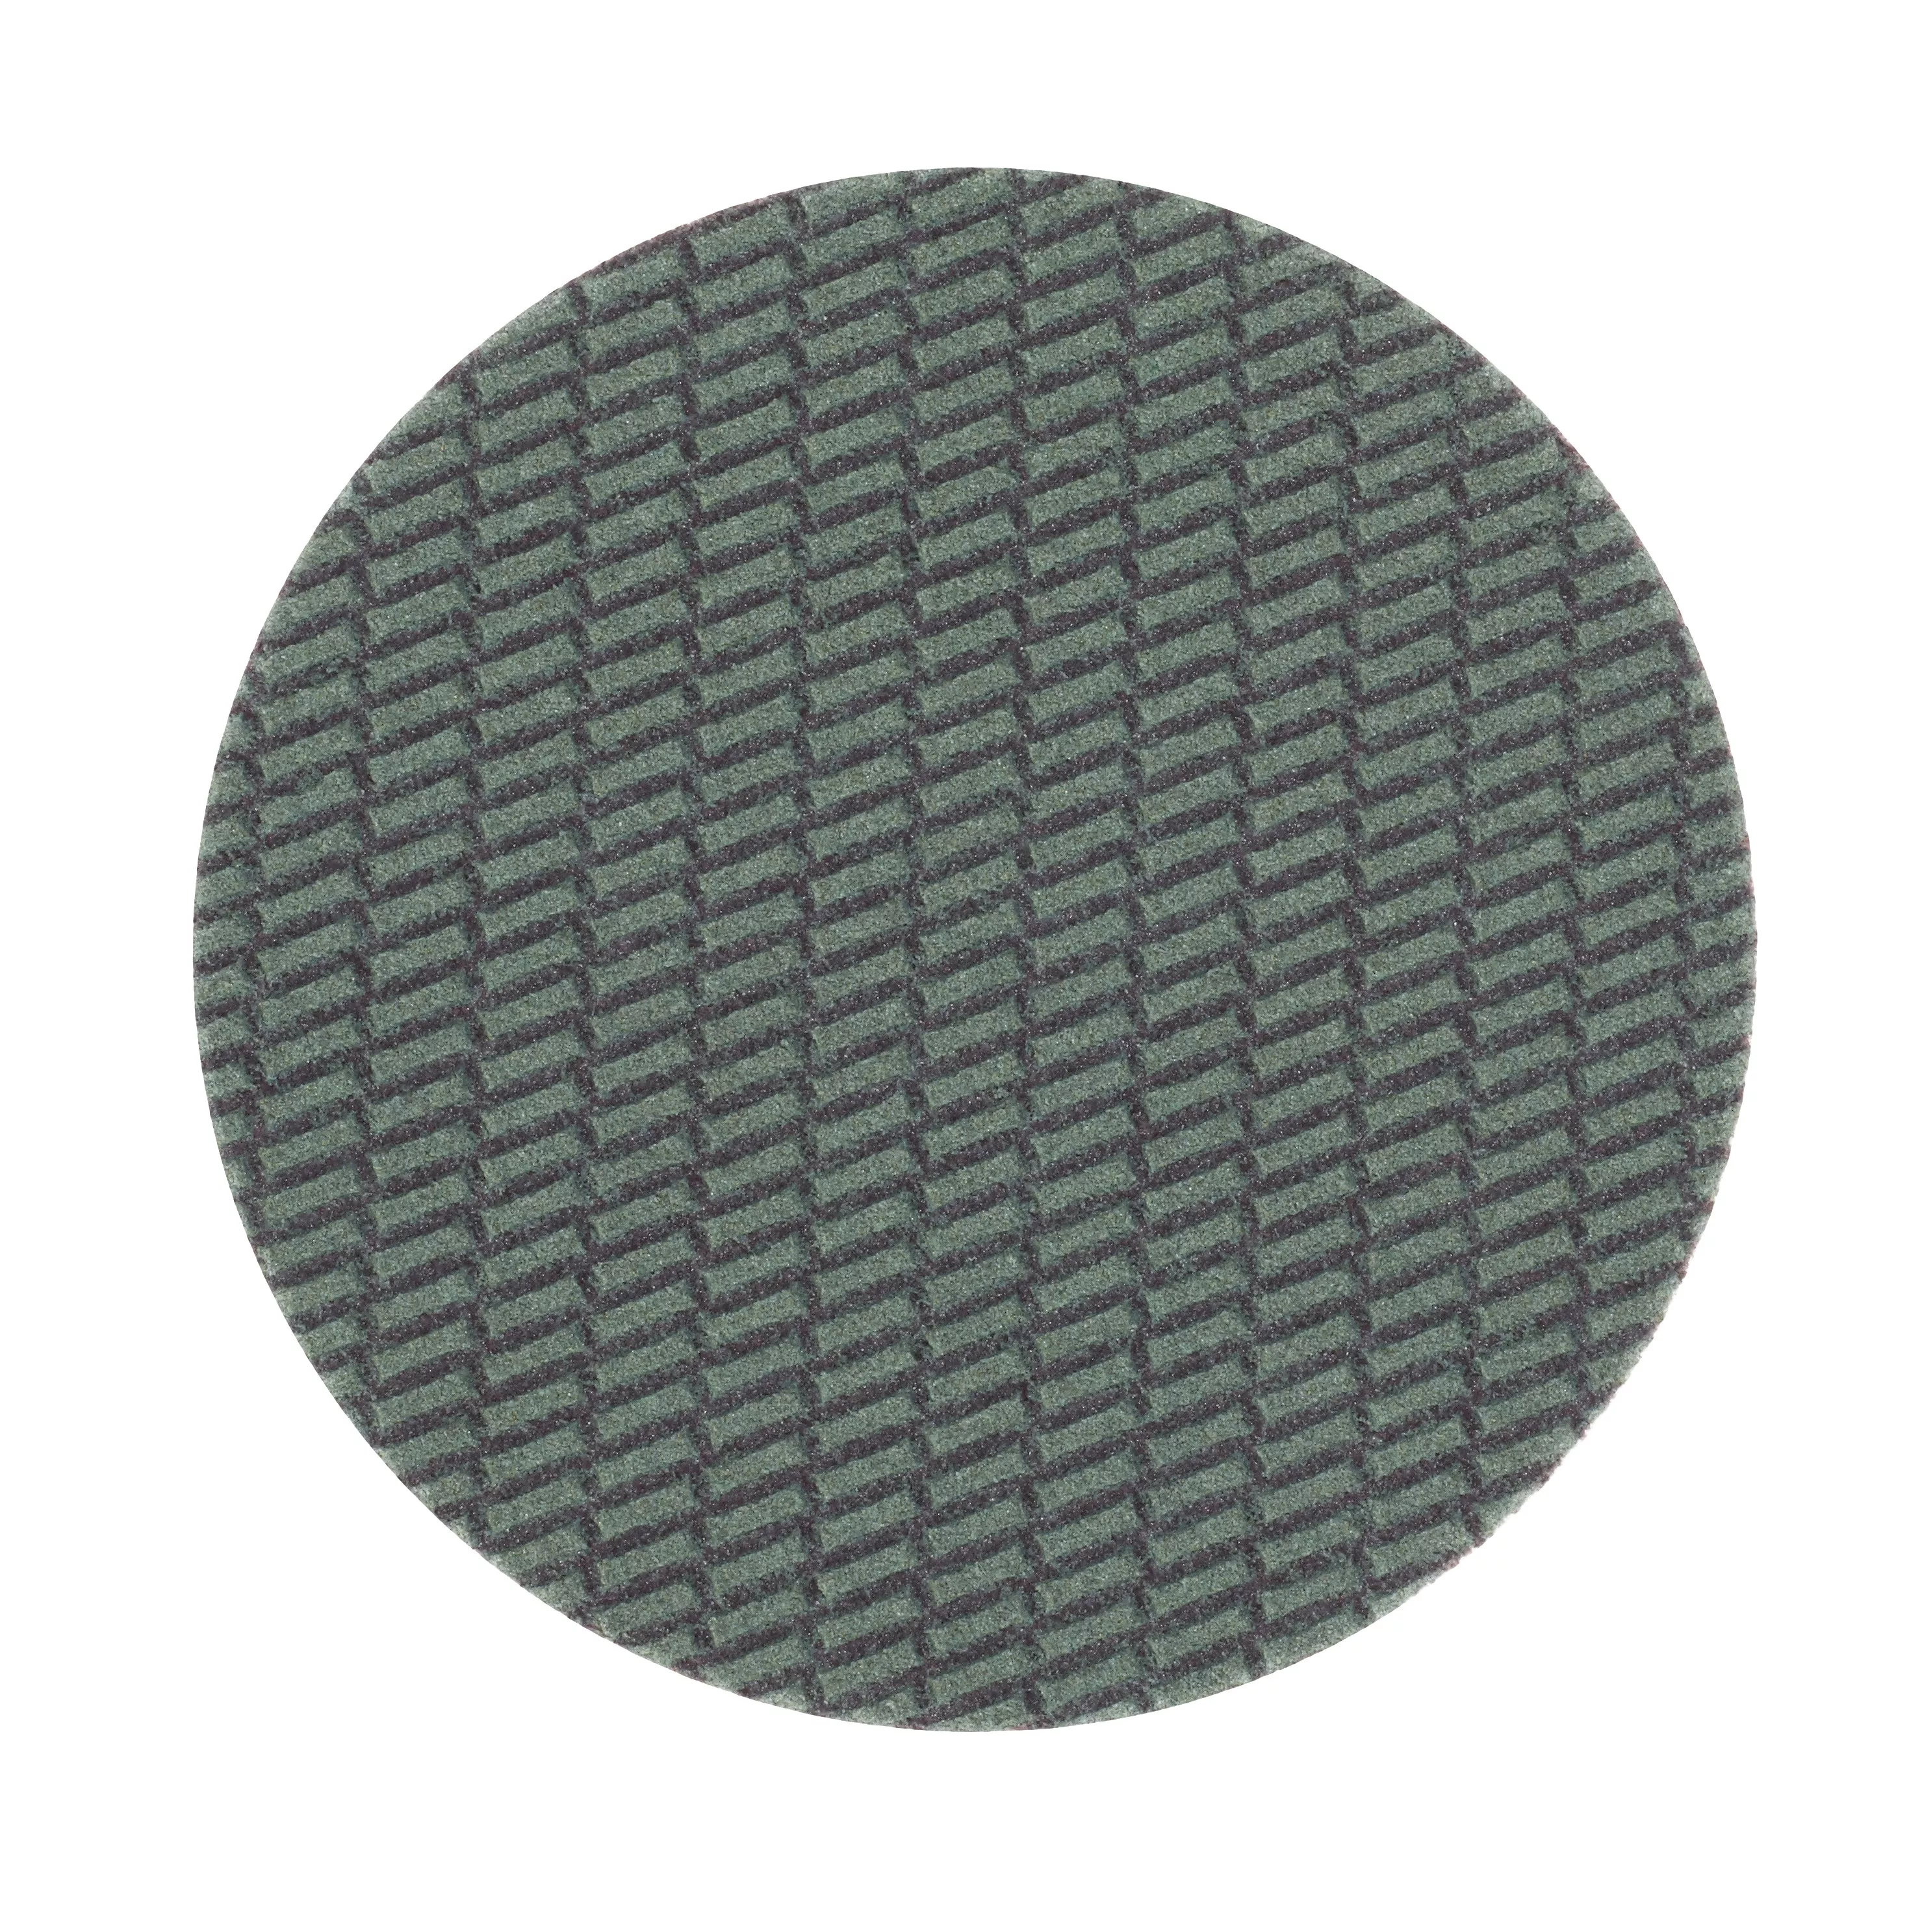 3M™ Trizact™ Hookit™ Cloth Disc 337DC, 5 in x NH, A160 X-weight, 50
ea/Case